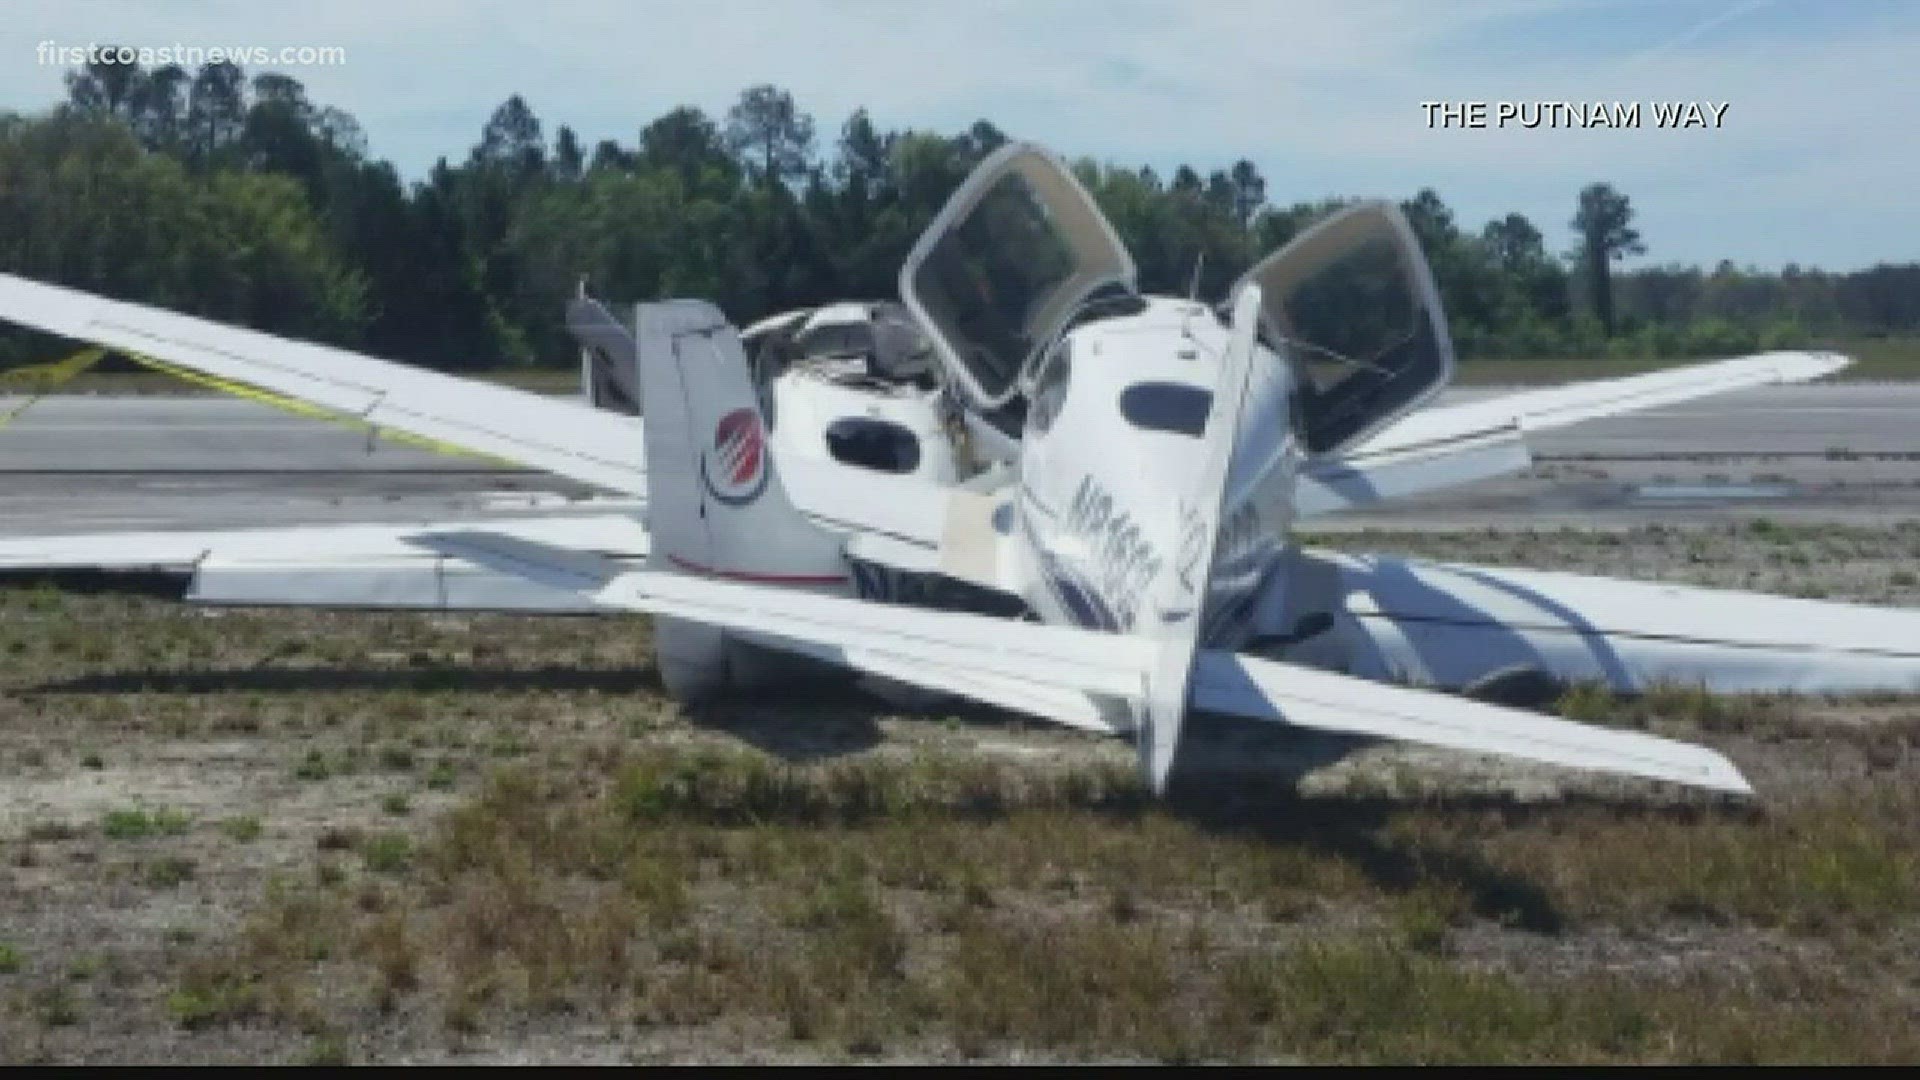 According to the Florida Highway Patrol, two planes collided while on the ground at the Key Larkin Airport in Palatka.Officials report no one was injured in the small collision.